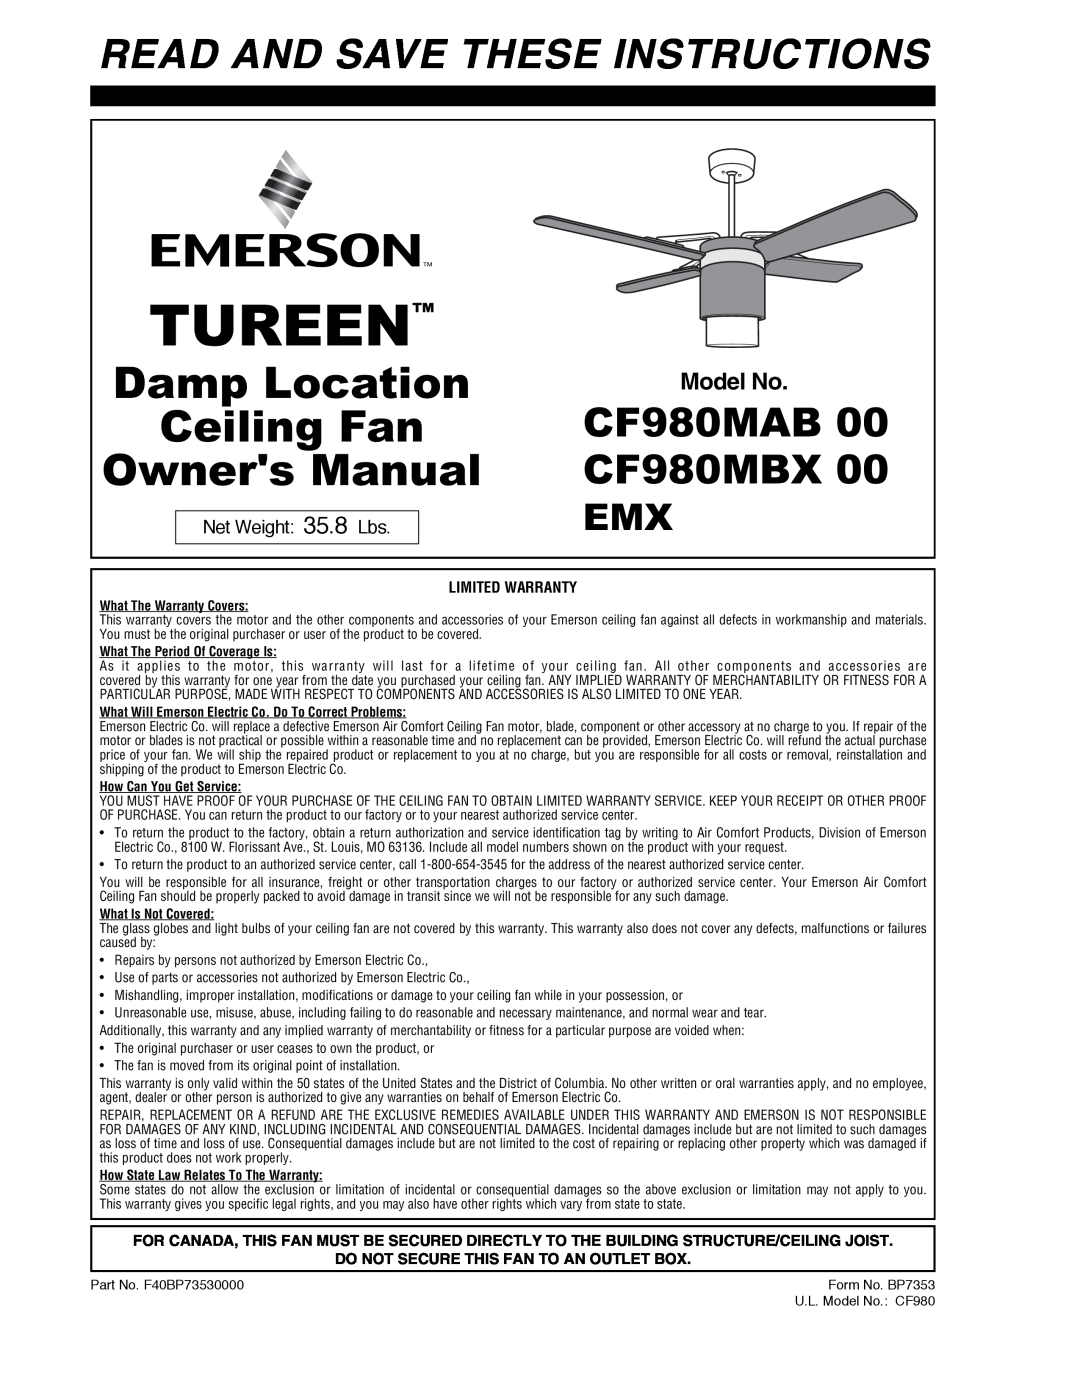 Emerson CF980MBX 00 warranty Tureen, Damp Location, Ceiling Fan, Read And Save These Instructions, CF980MAB, Model No 